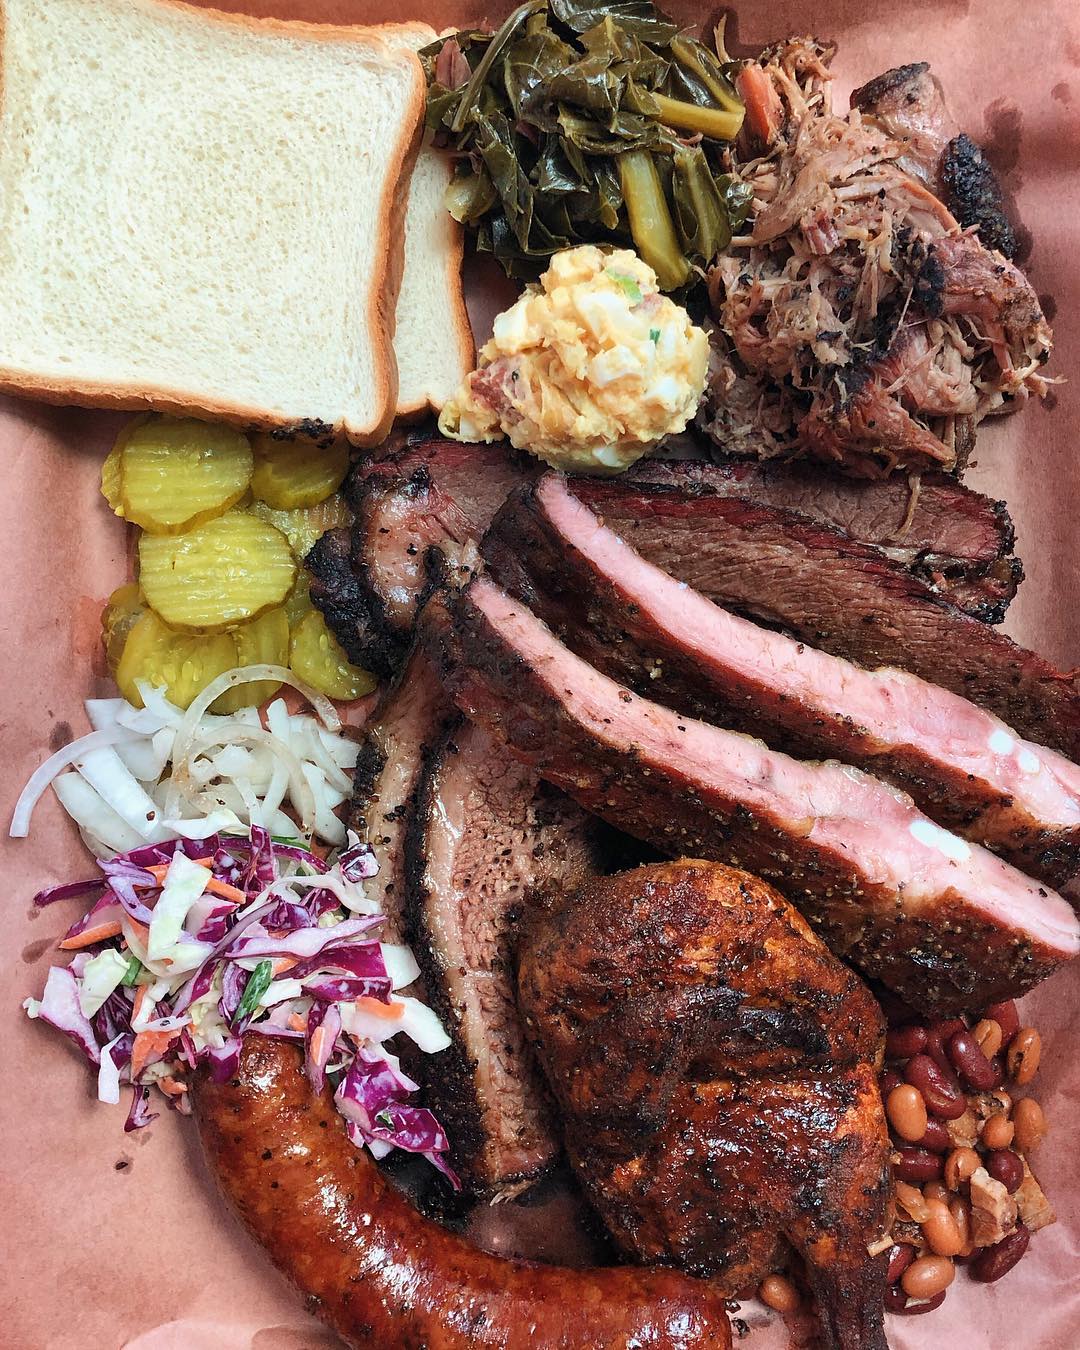 A BBQ platter for 2 from Horn Barbecue